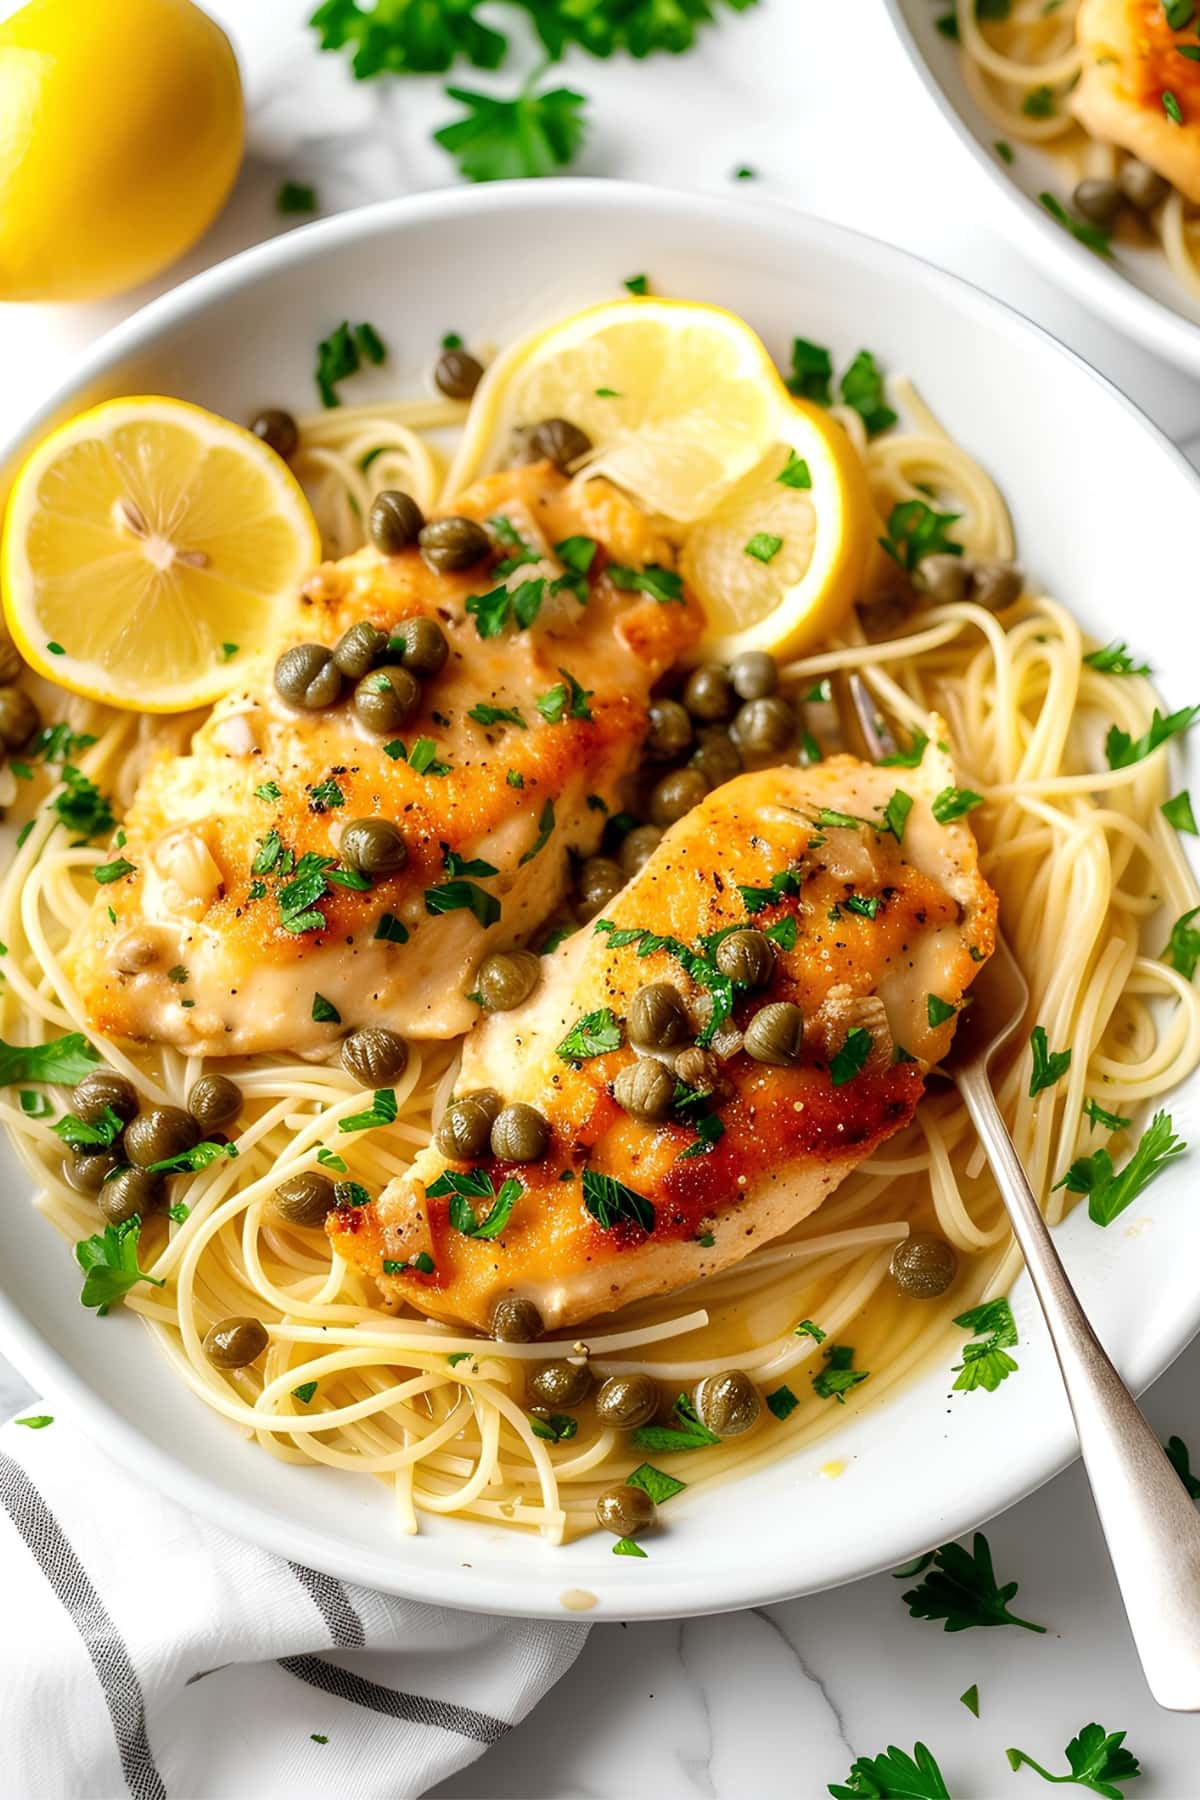 Homemade Chicken Piccata with Angel Hair Pasta, Capers and Lemon in a White Plate